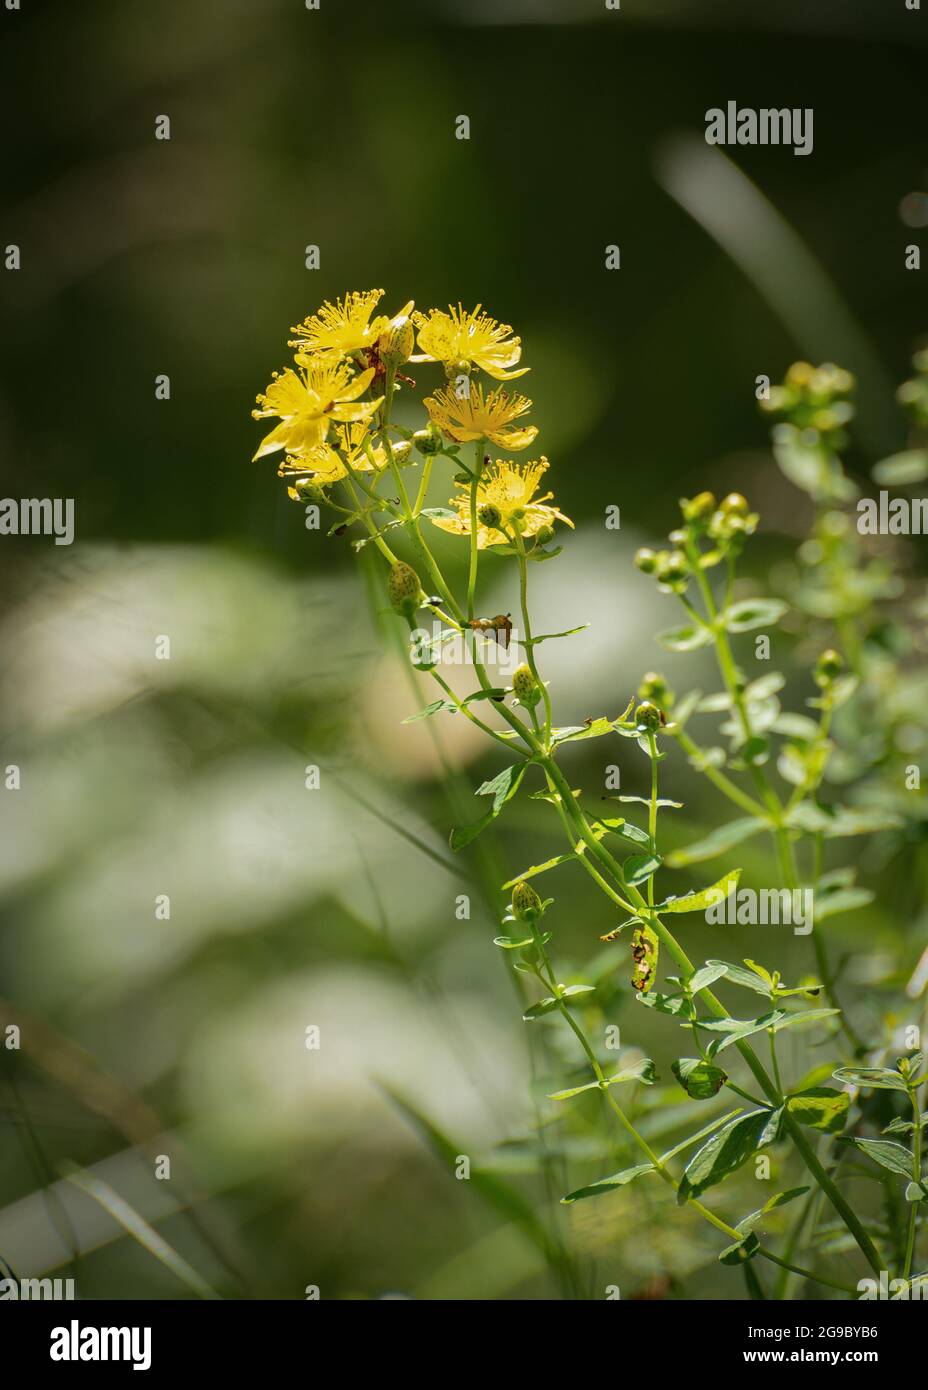 St. John's wort plant with yellow flowers close up Stock Photo